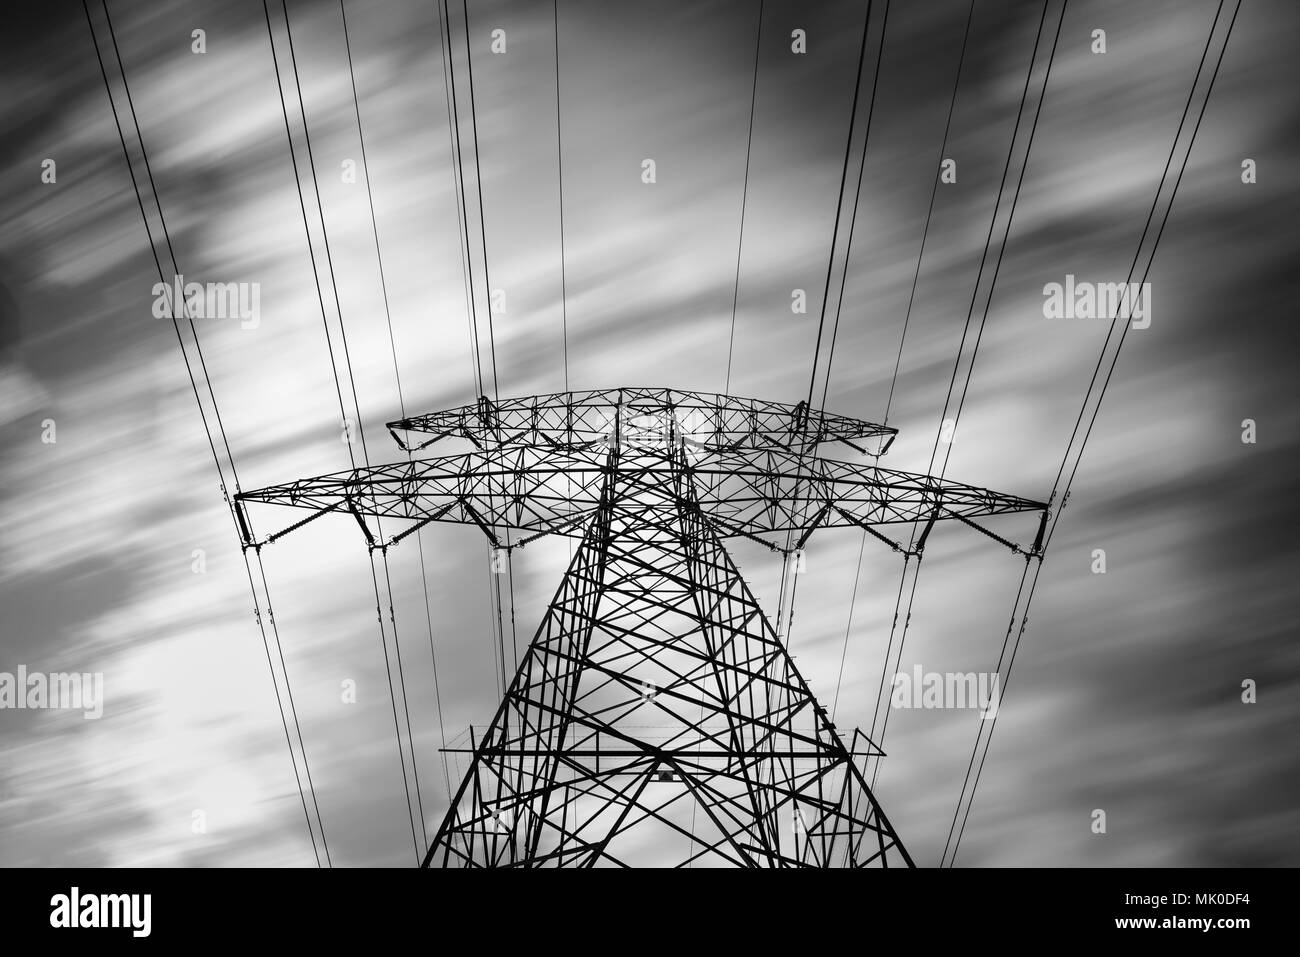 Details of a metallic structure of a high voltage electricity tower holding transmission wires to transfer electrical energy Stock Photo